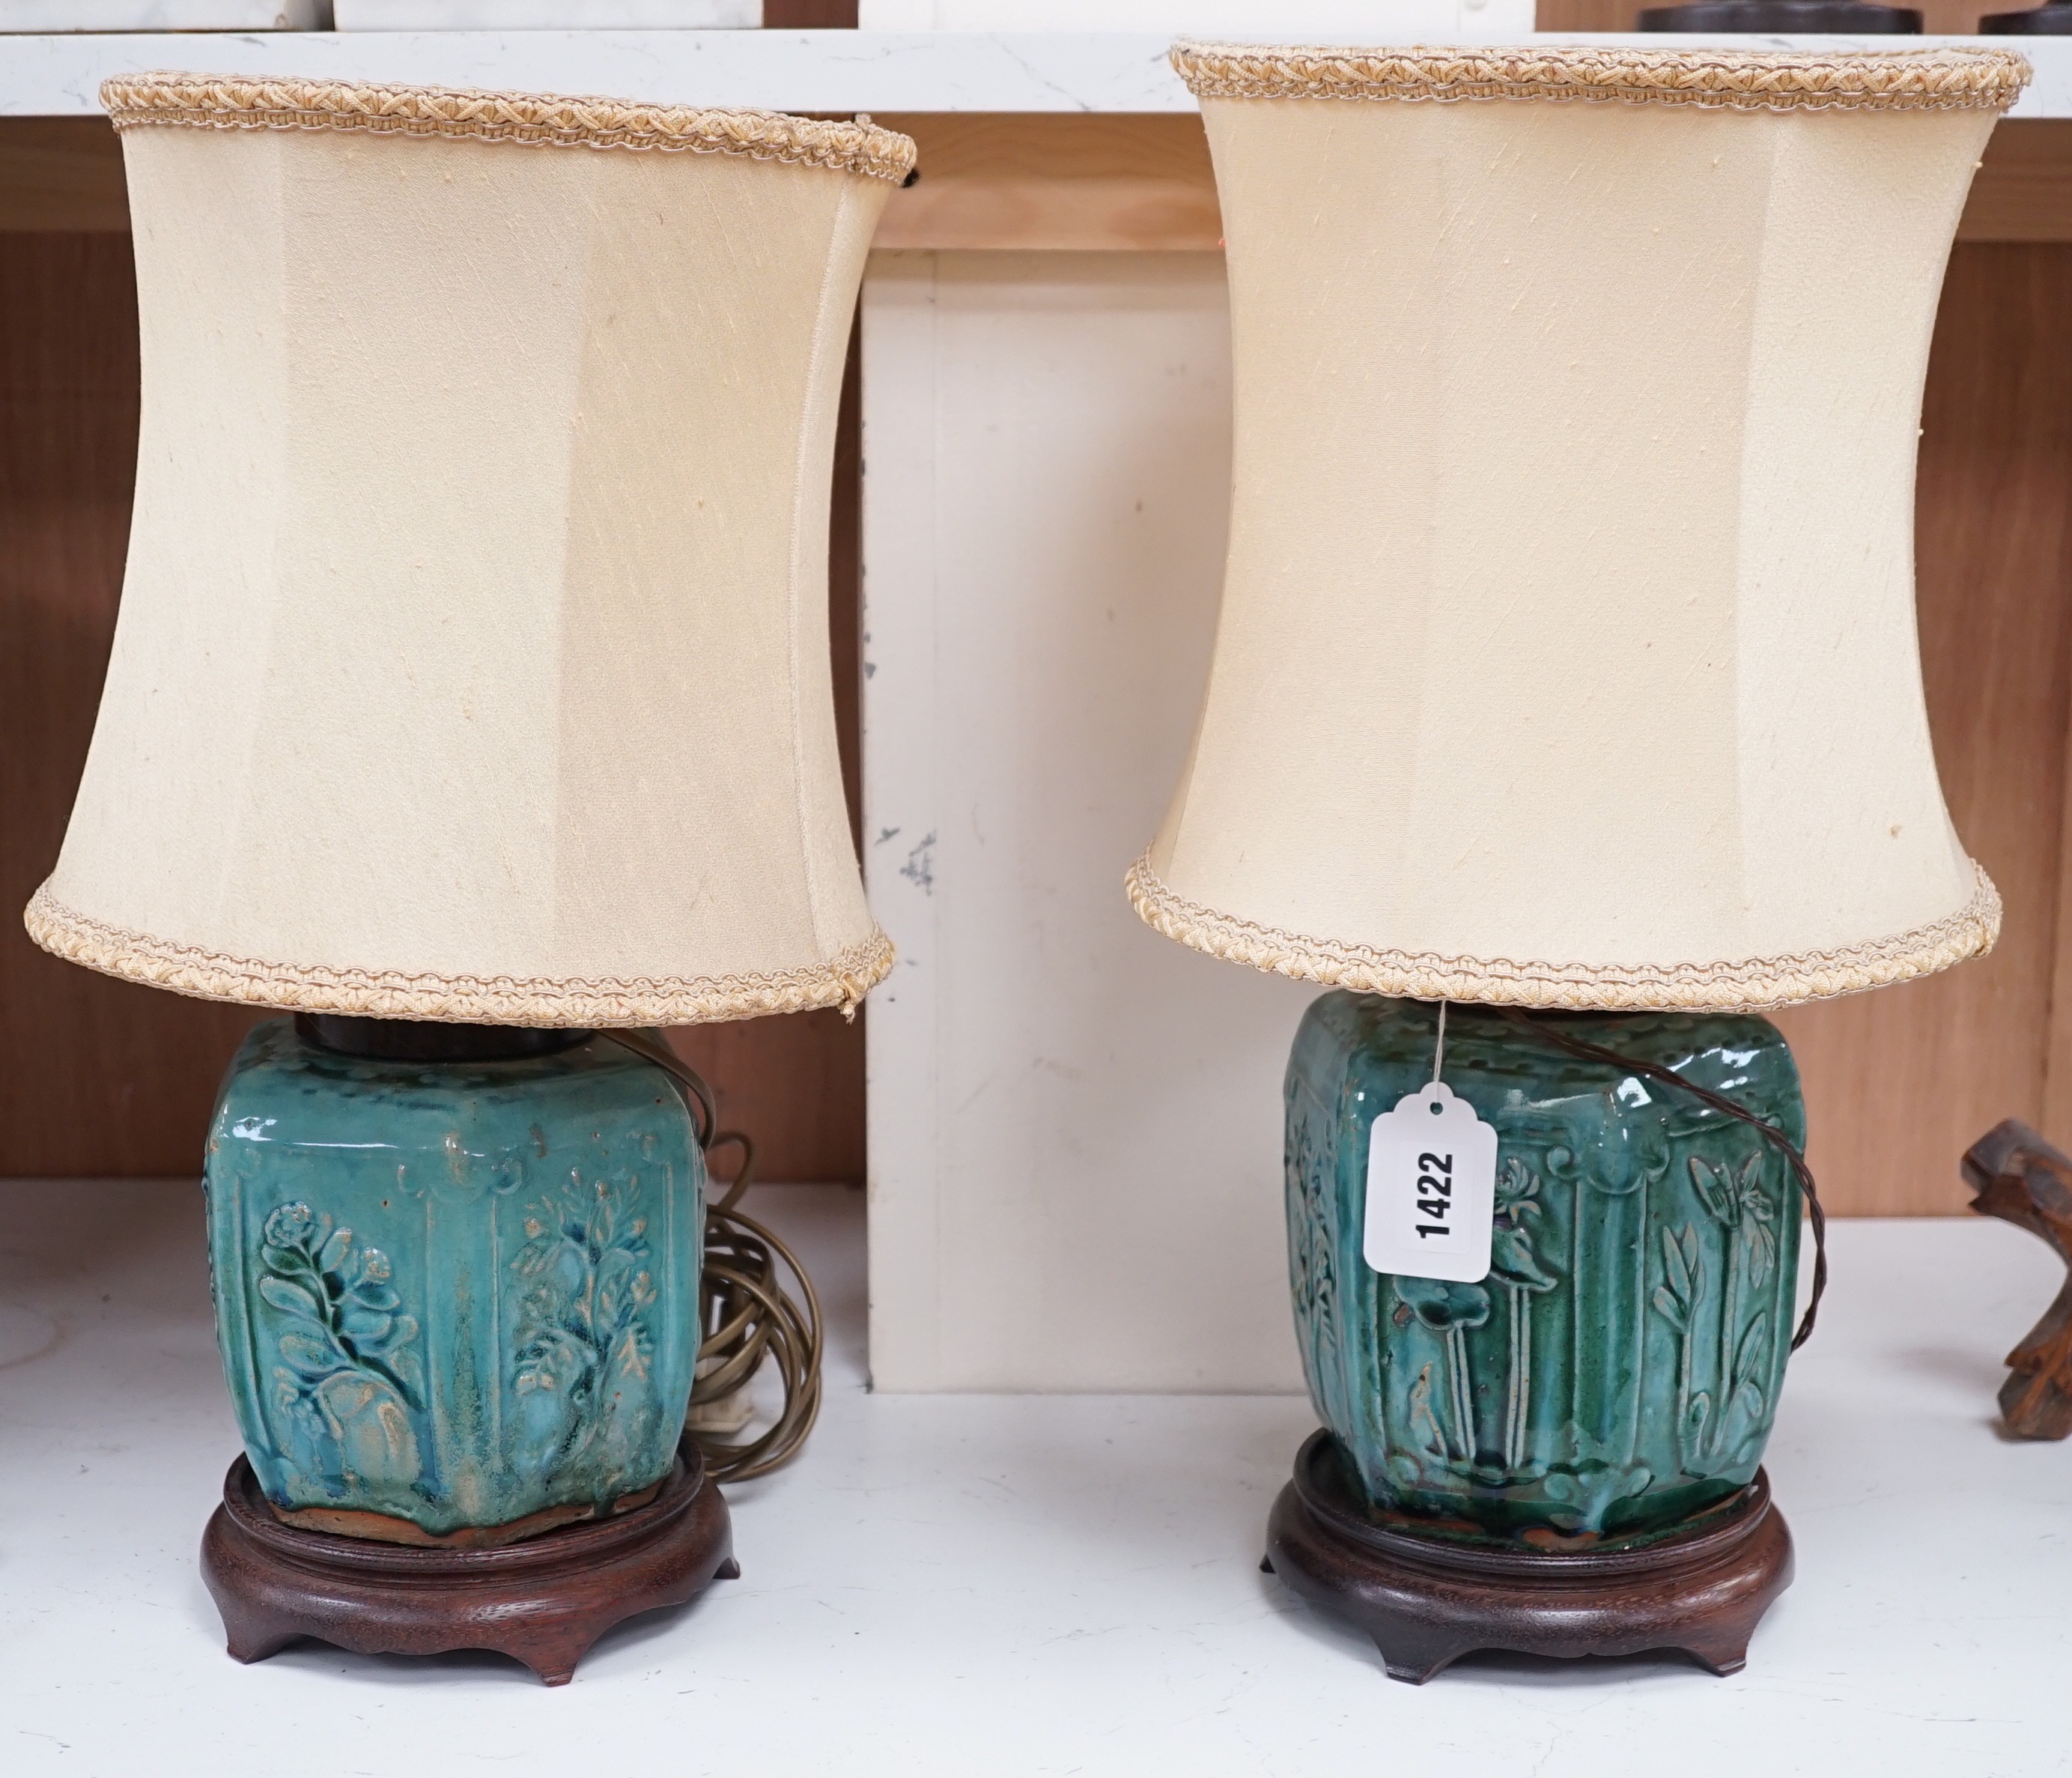 A pair of Chinese blue glazed earthenware hexagonal vase lamps on wooden mounts, with their shades. 45cm tall overall